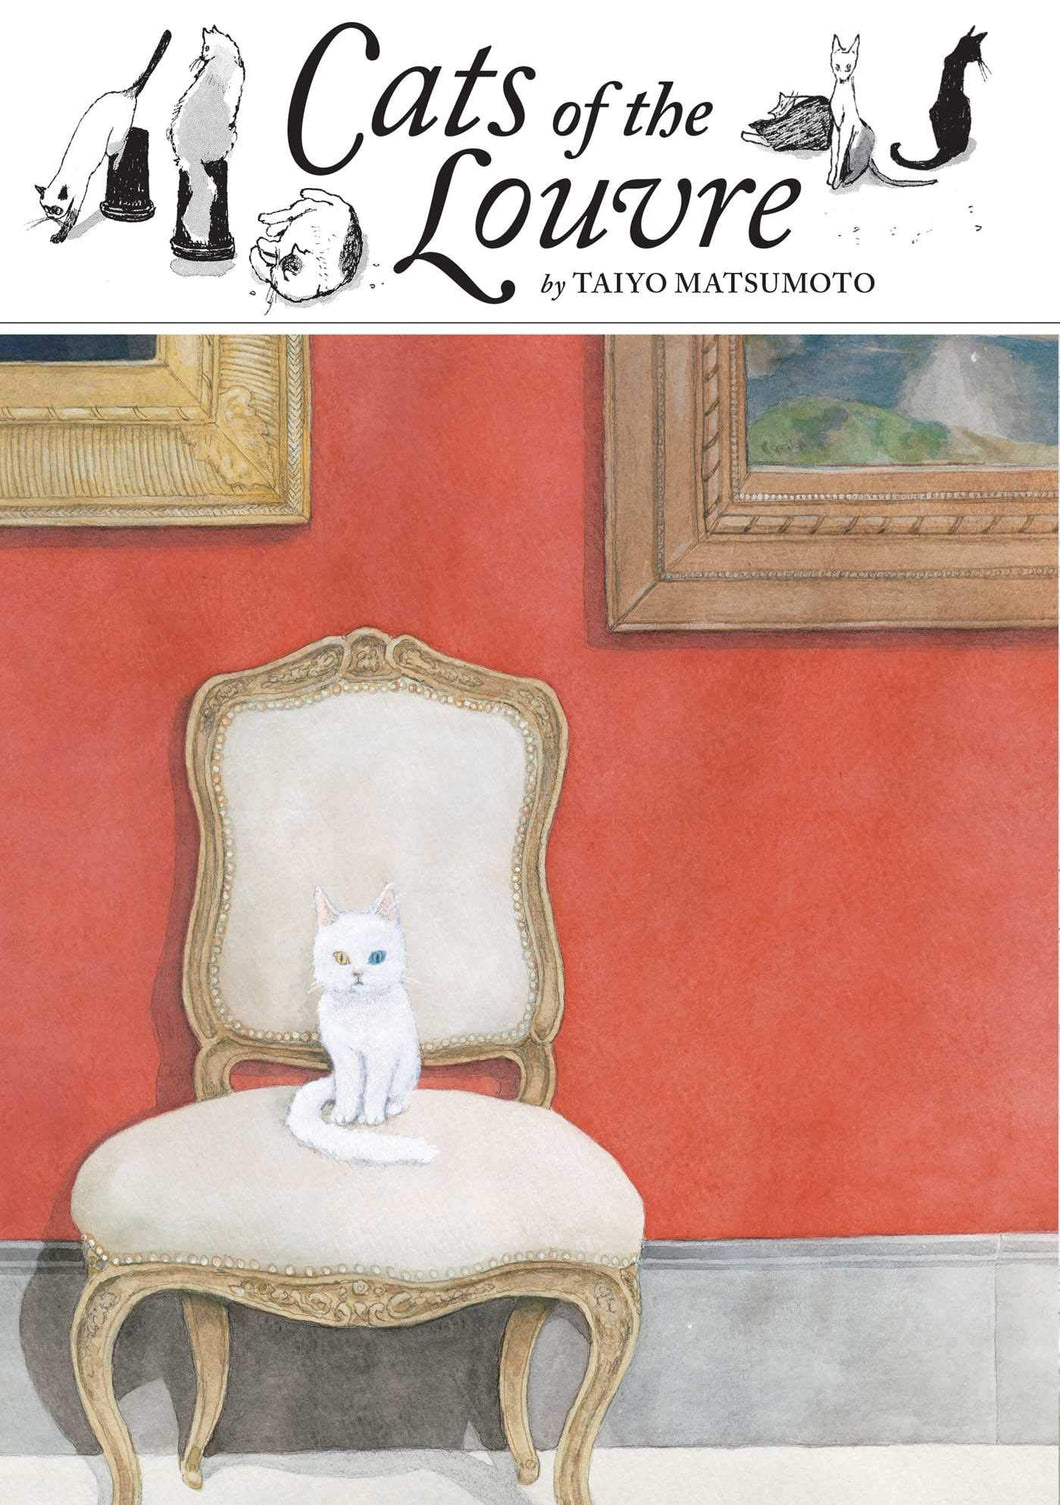 Cats of the Louvre by Taiyo Matsumoto